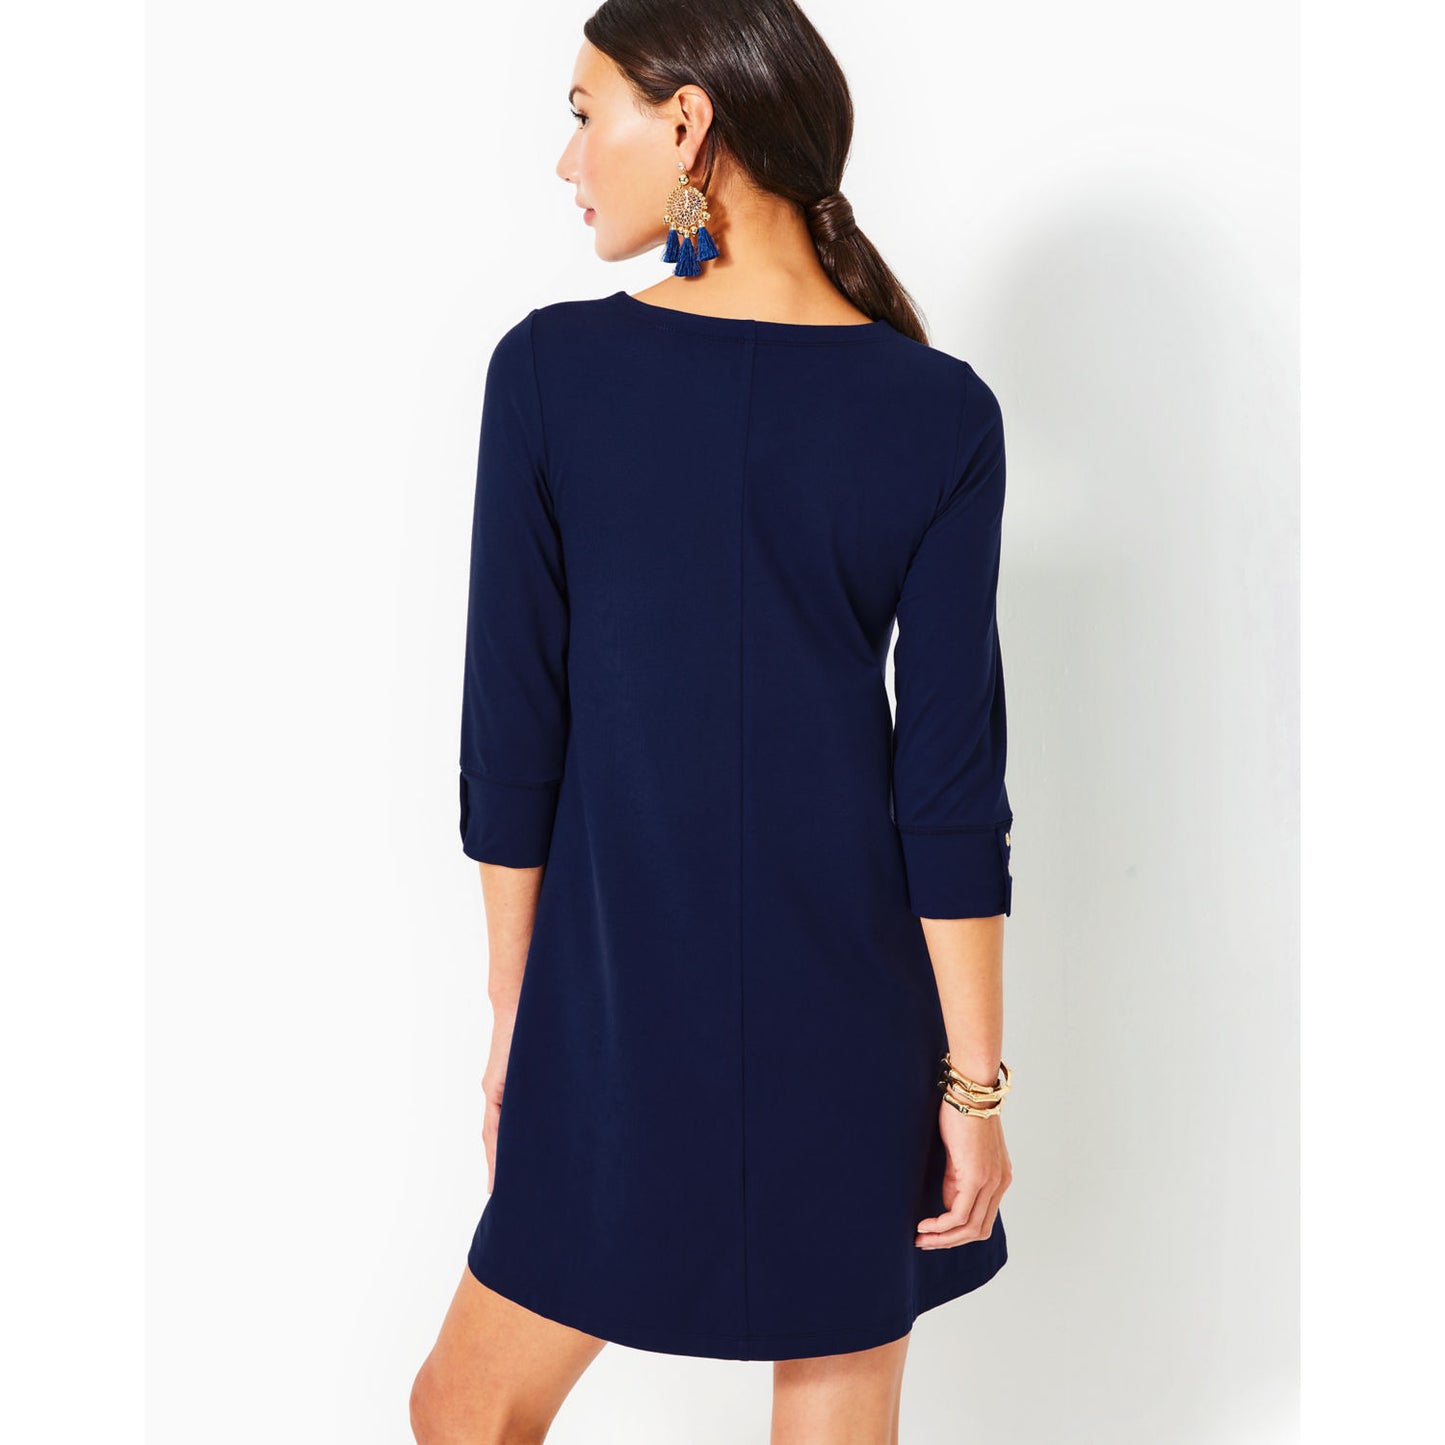 SOLIA DOWNTIME JERSEY UPF DRESS